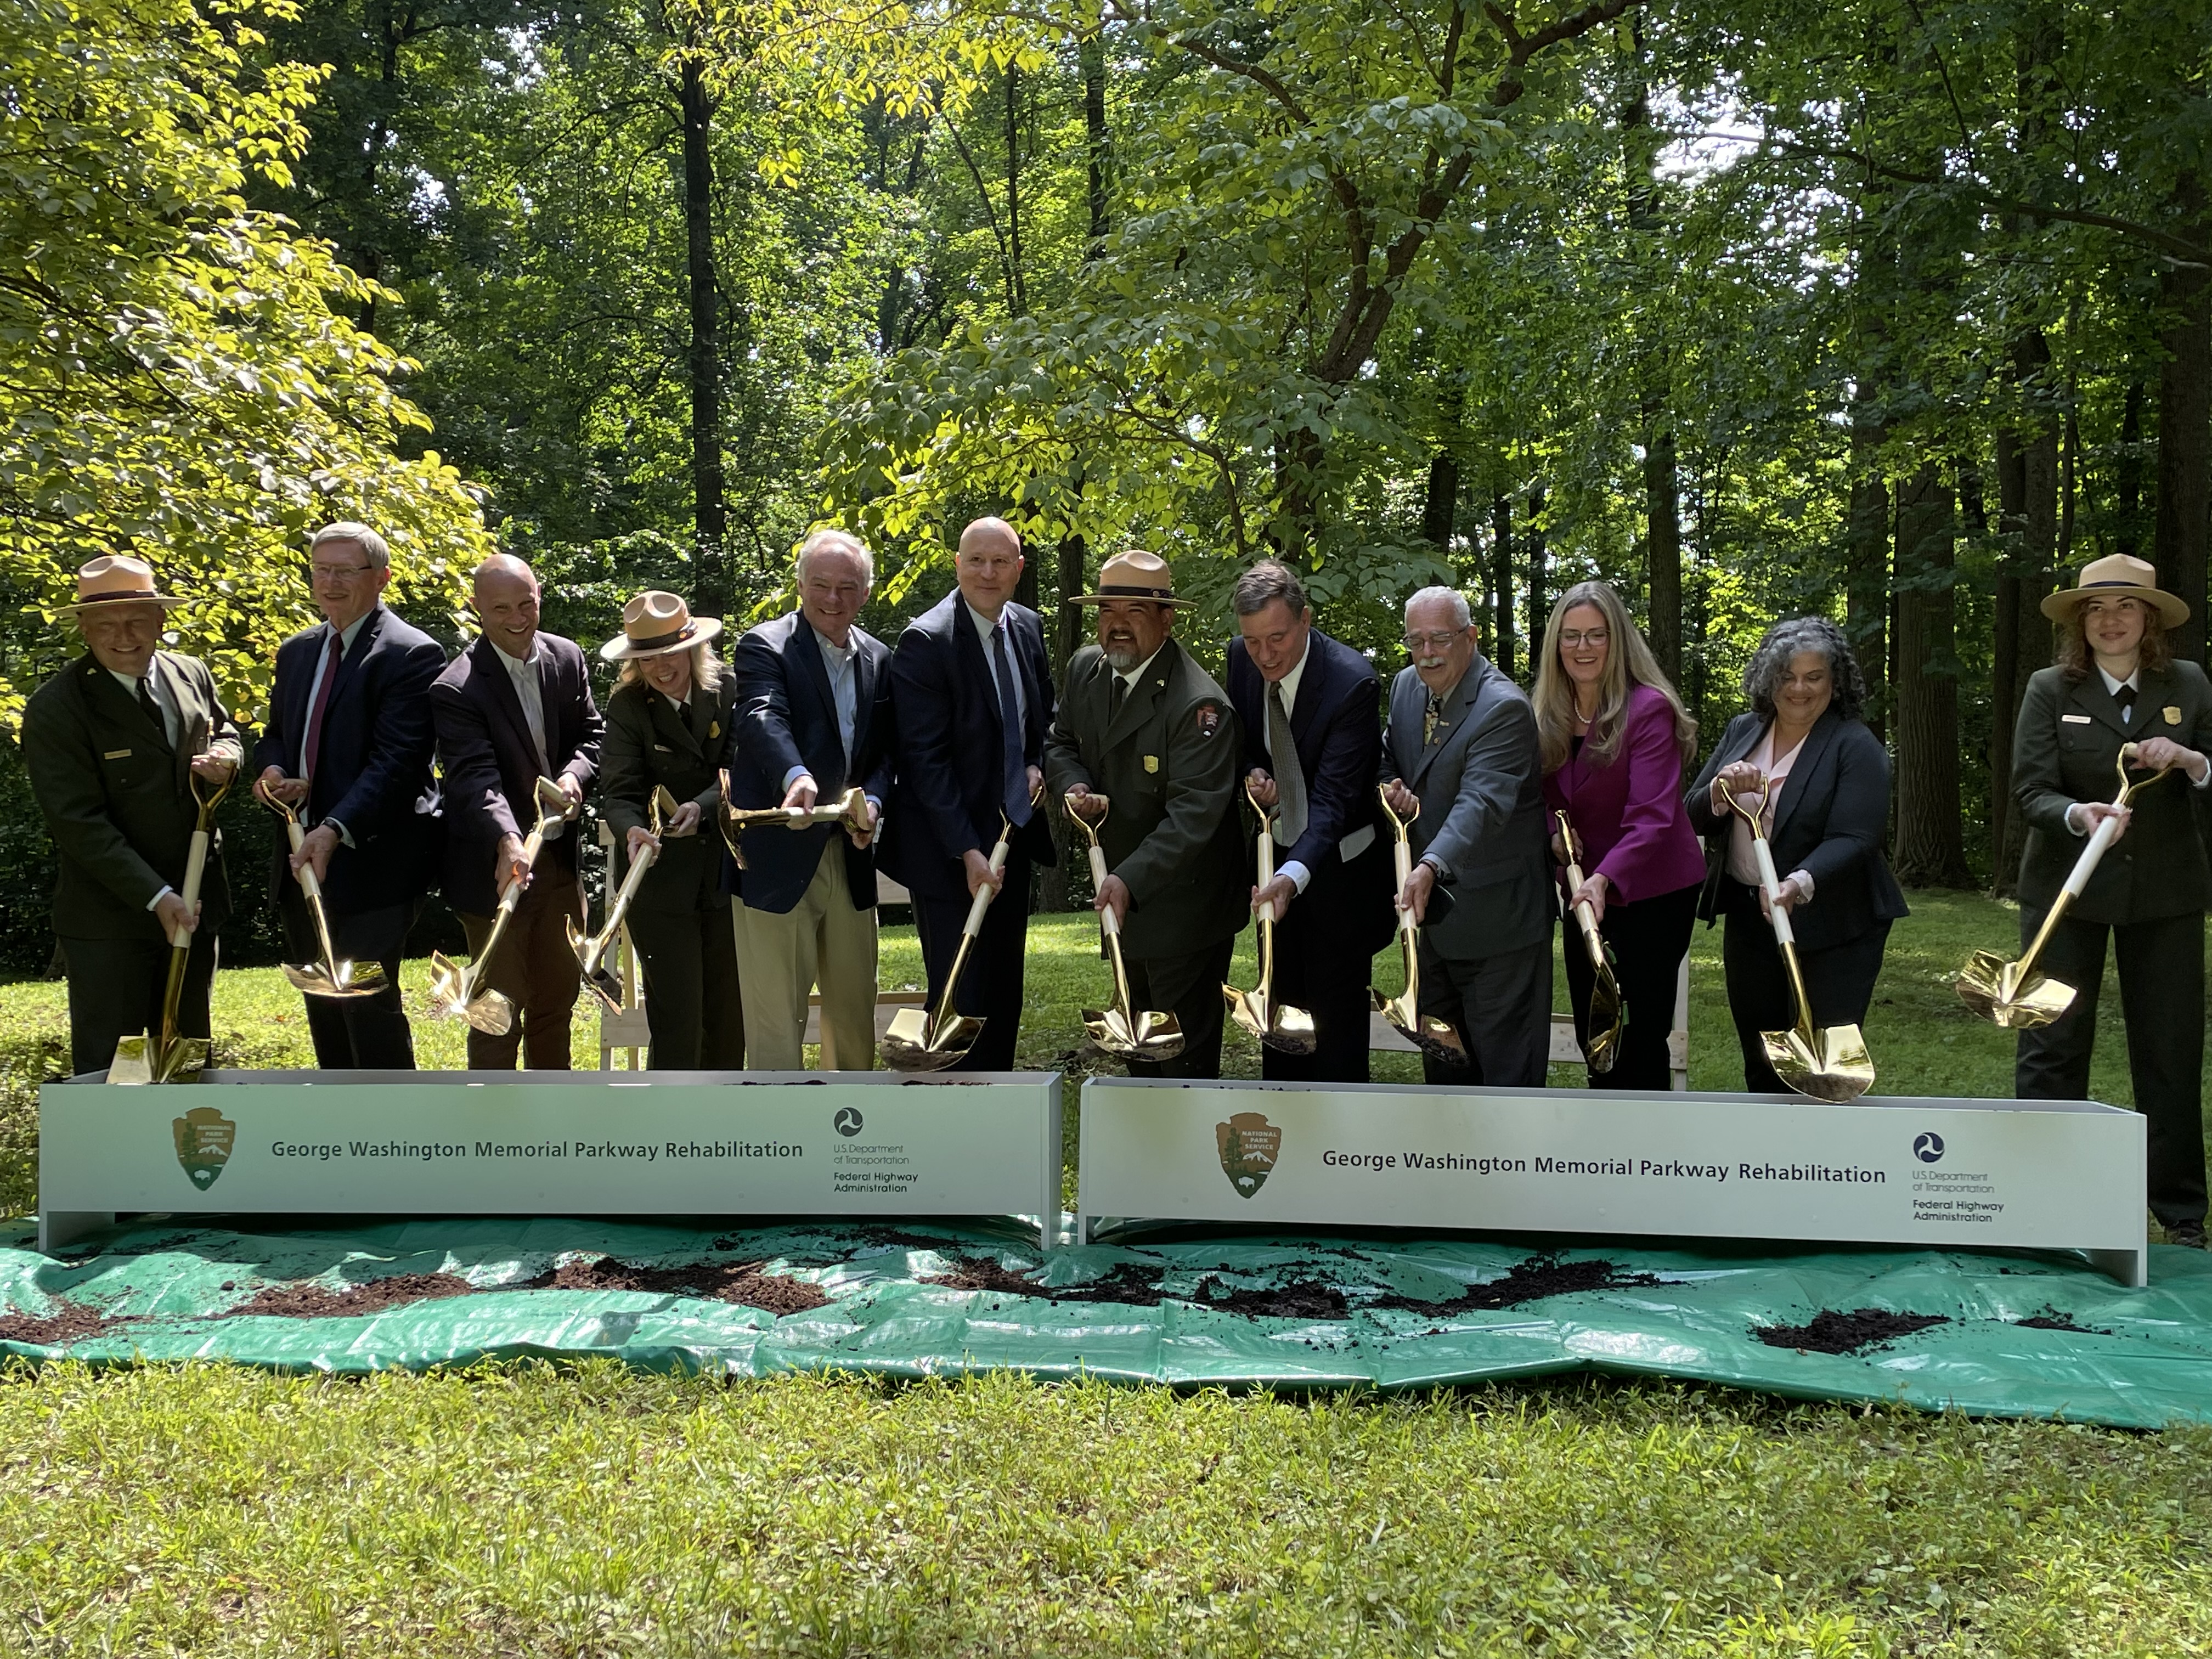 Various people, wearing suits and green uniforms, dig dirt behind a banner reading "George Washington Memorial Parkway Rehabilitation".